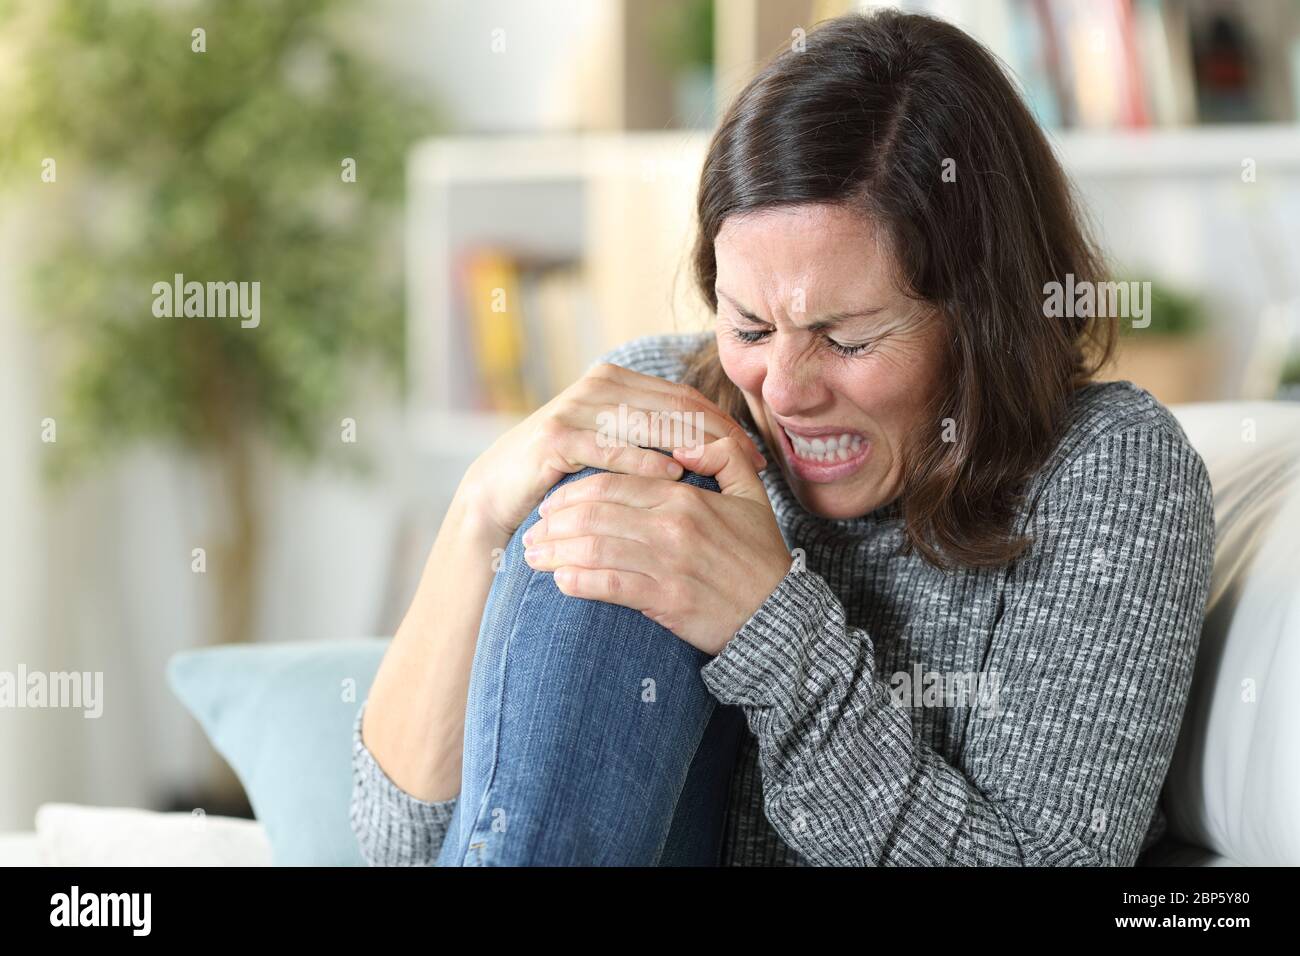 Adult woman in pain suffering knee ache sitting on a couch at home Stock Photo